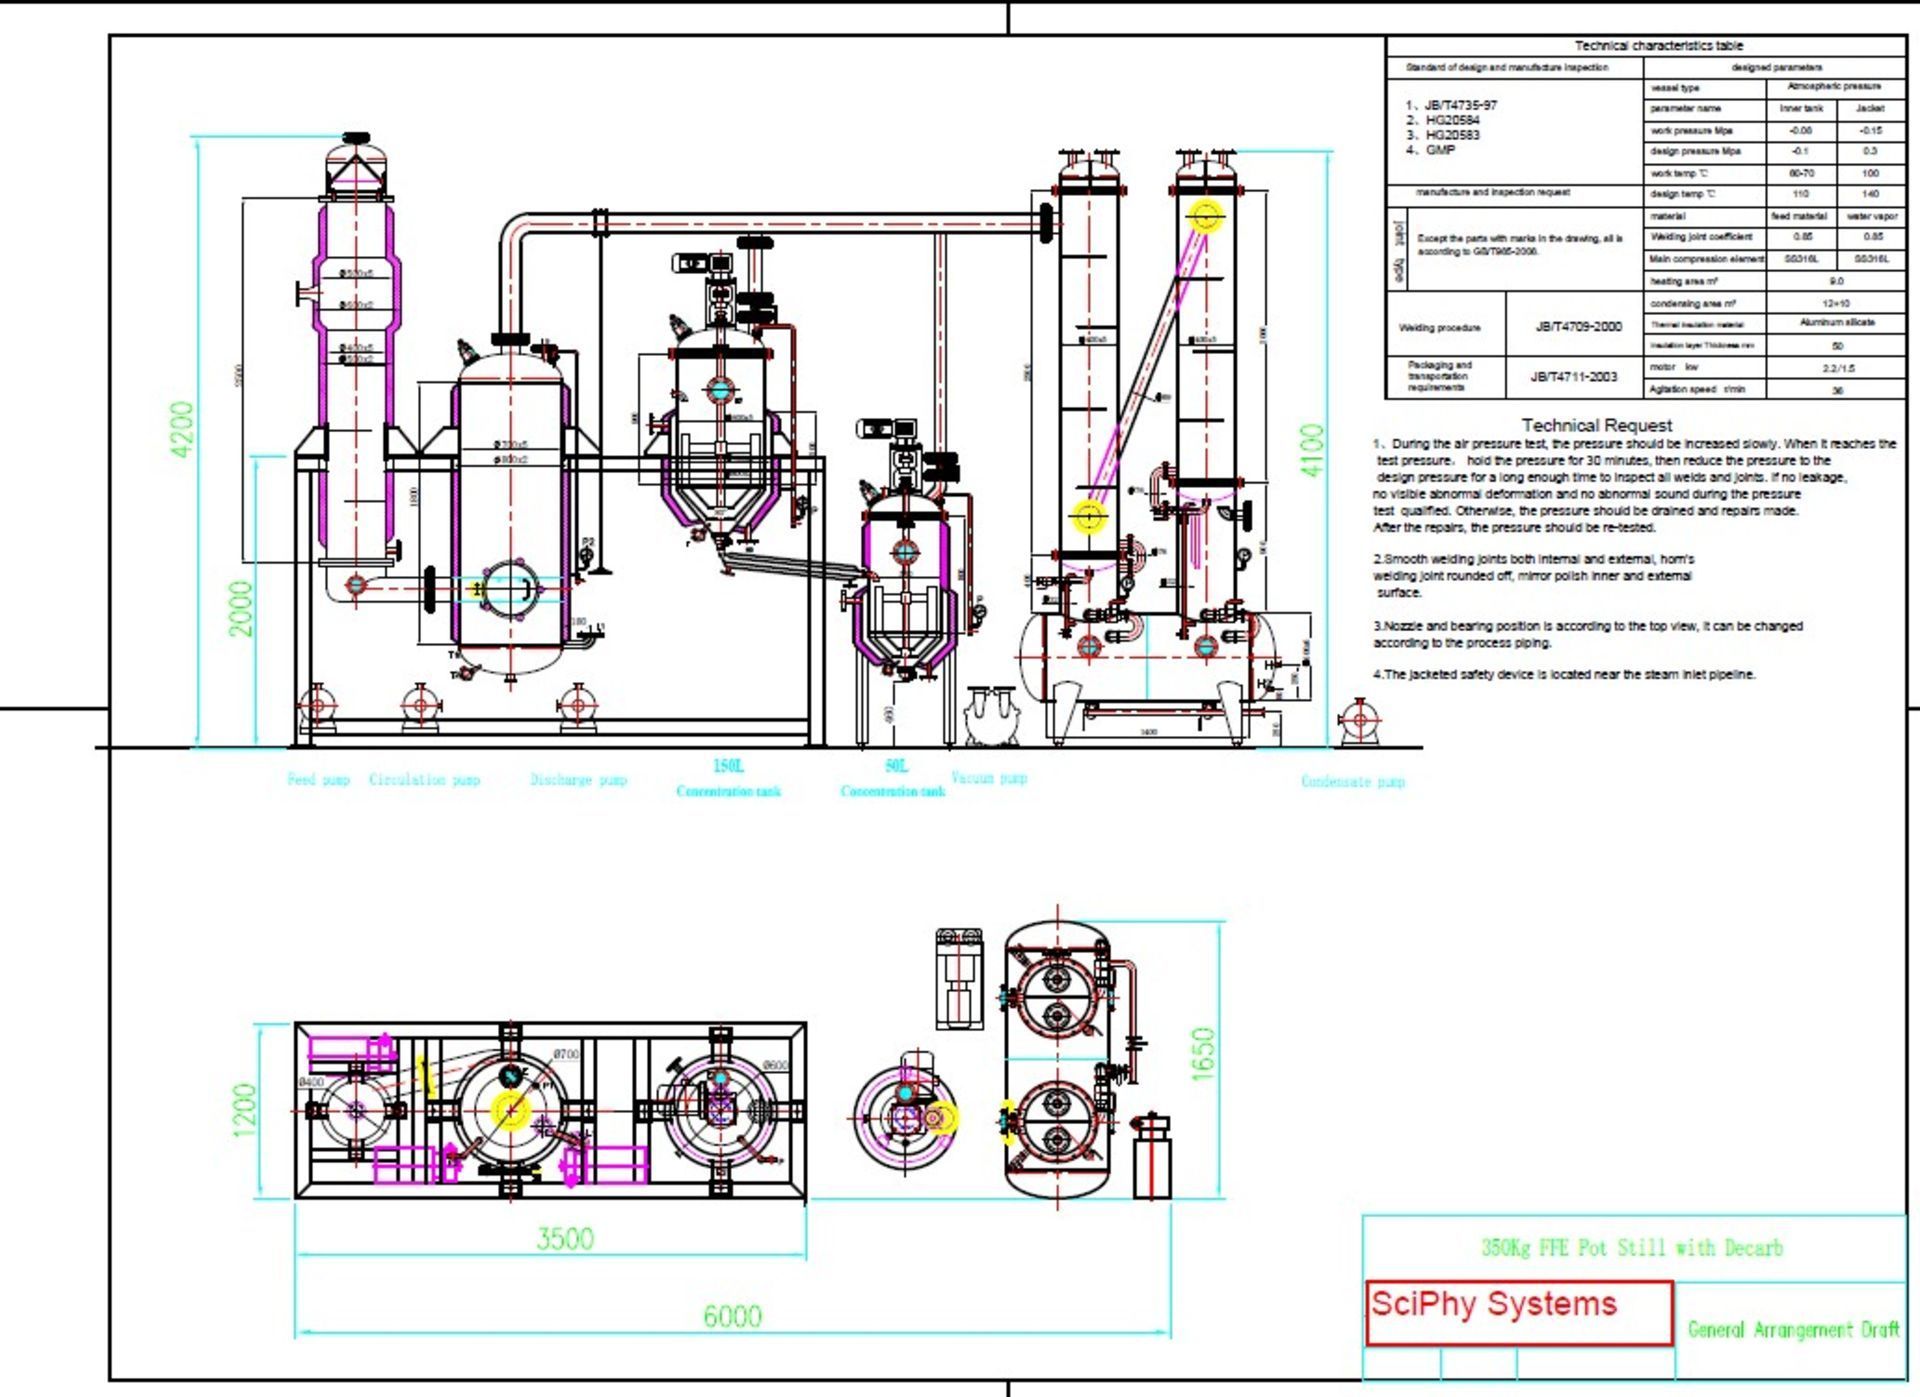 NEW Sciphy Systems Falling Film Evaporator, 350 kg/hr Falling Film Evaporator Distillation System, - Image 7 of 7